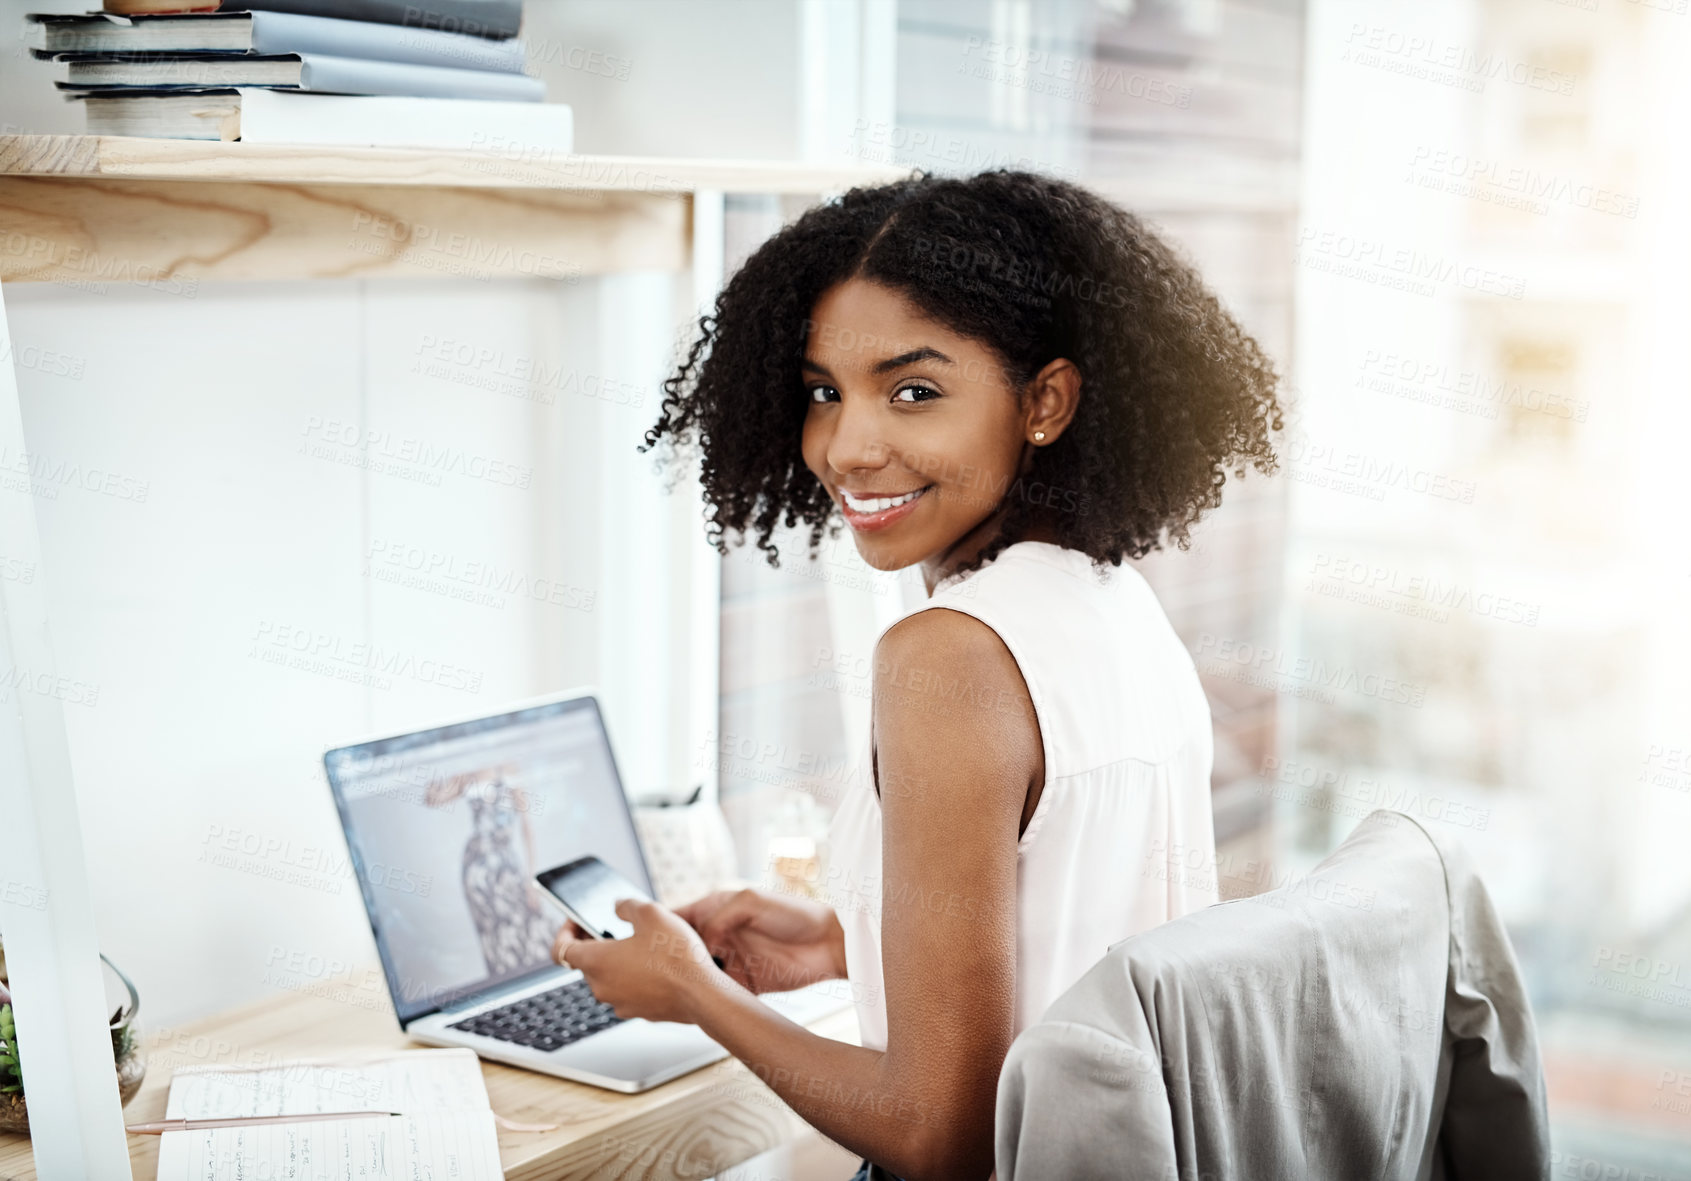 Buy stock photo Cropped portrait of an attractive young businesswoman working in her home office